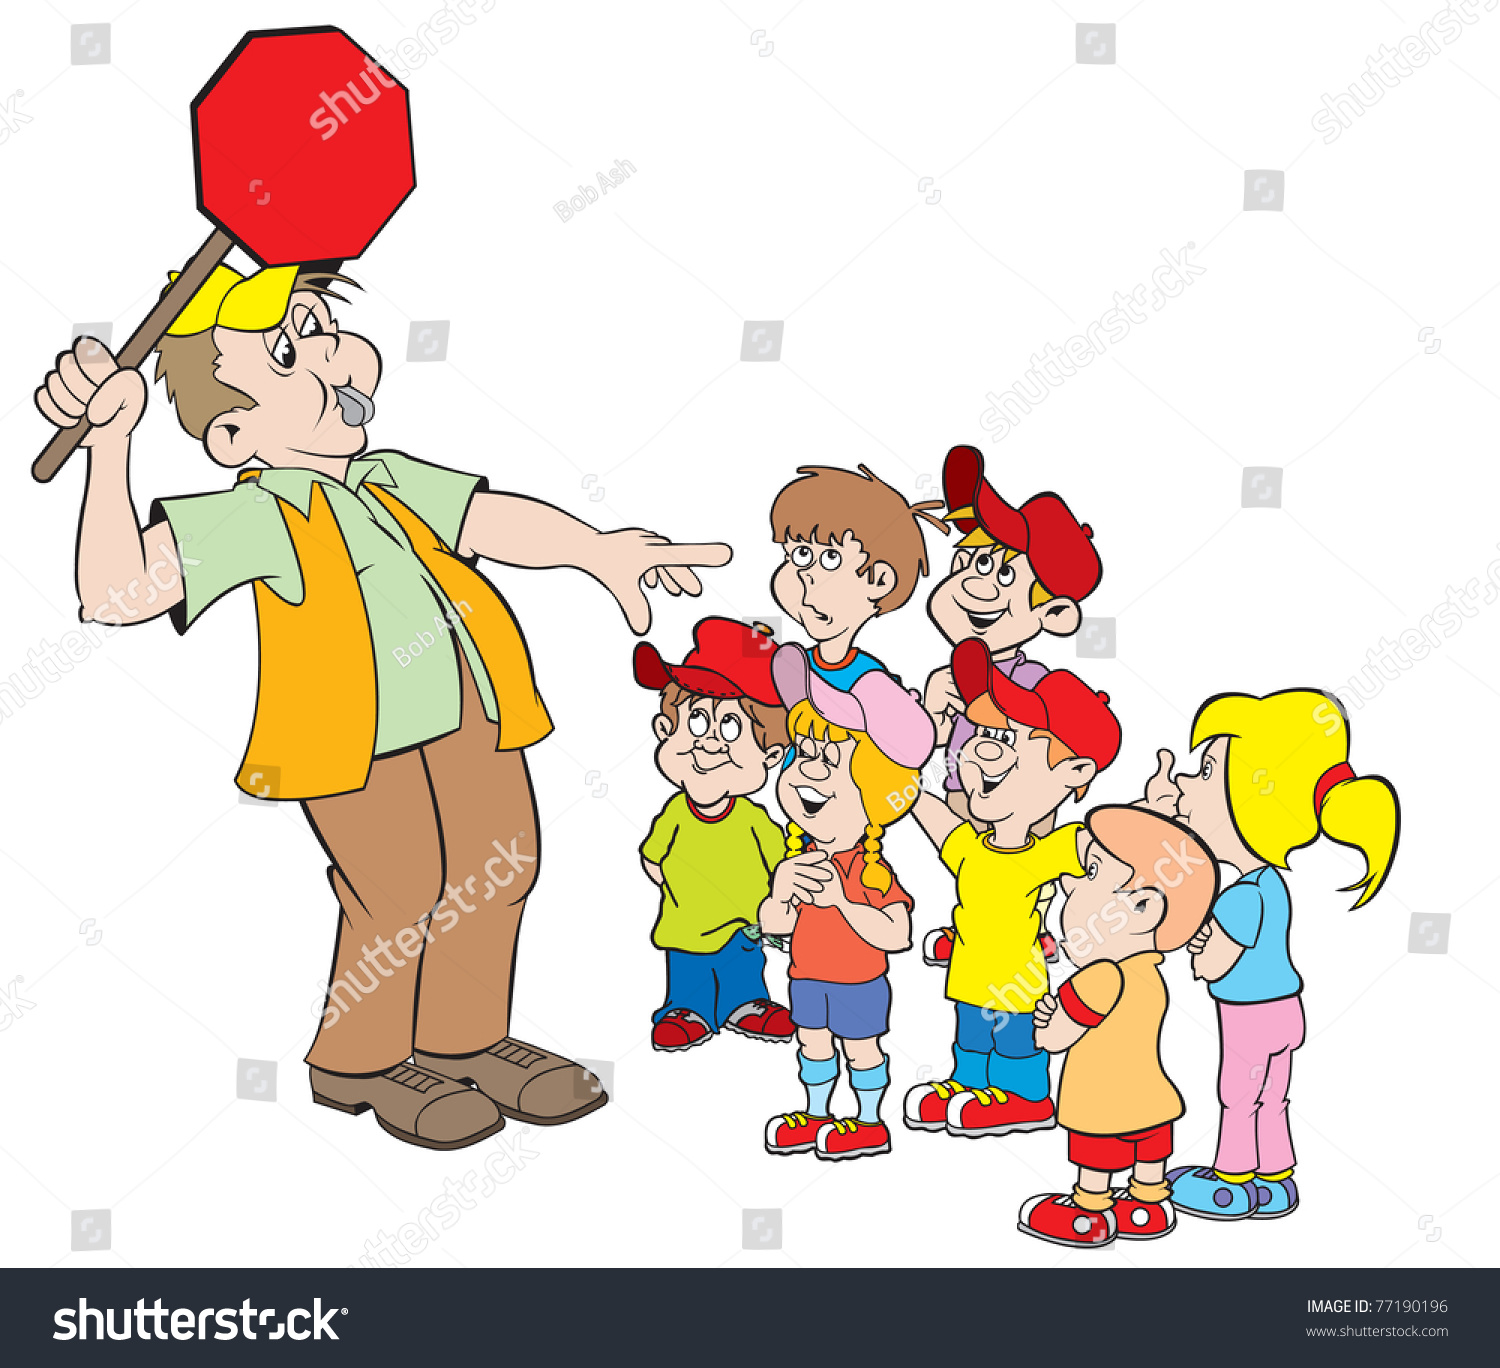 free clipart crossing guard - photo #12